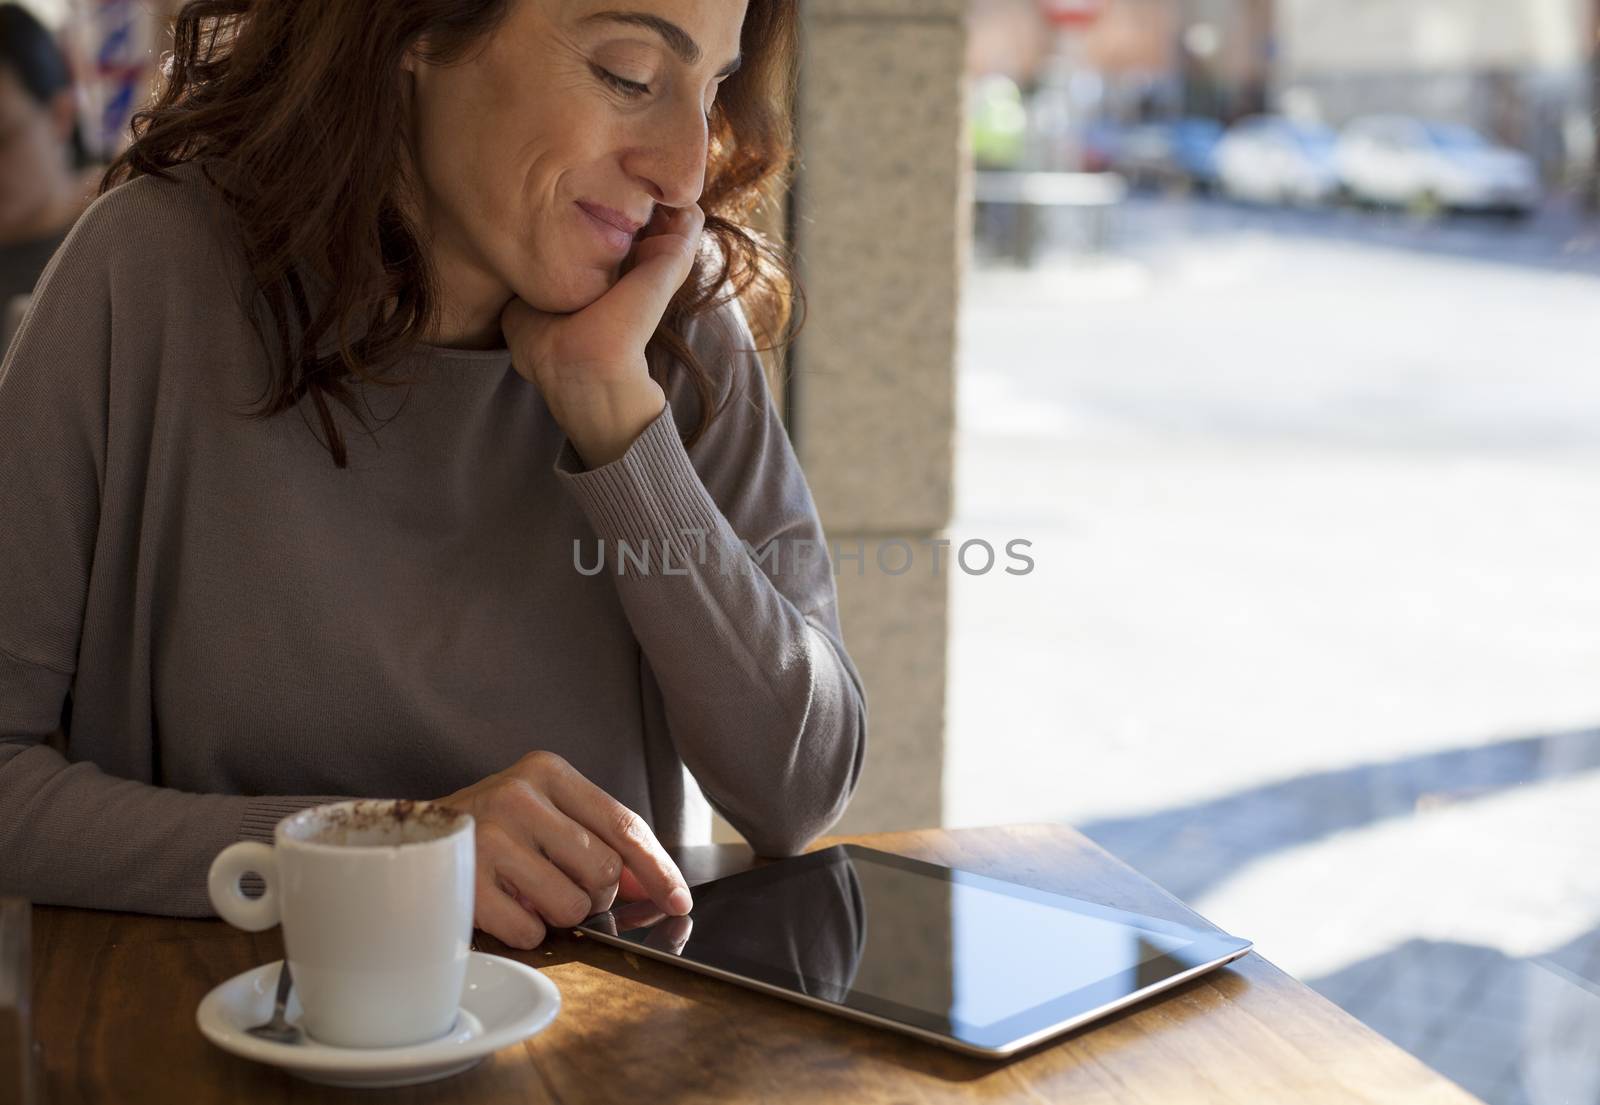 woman tablet in cafe horizontal by quintanilla